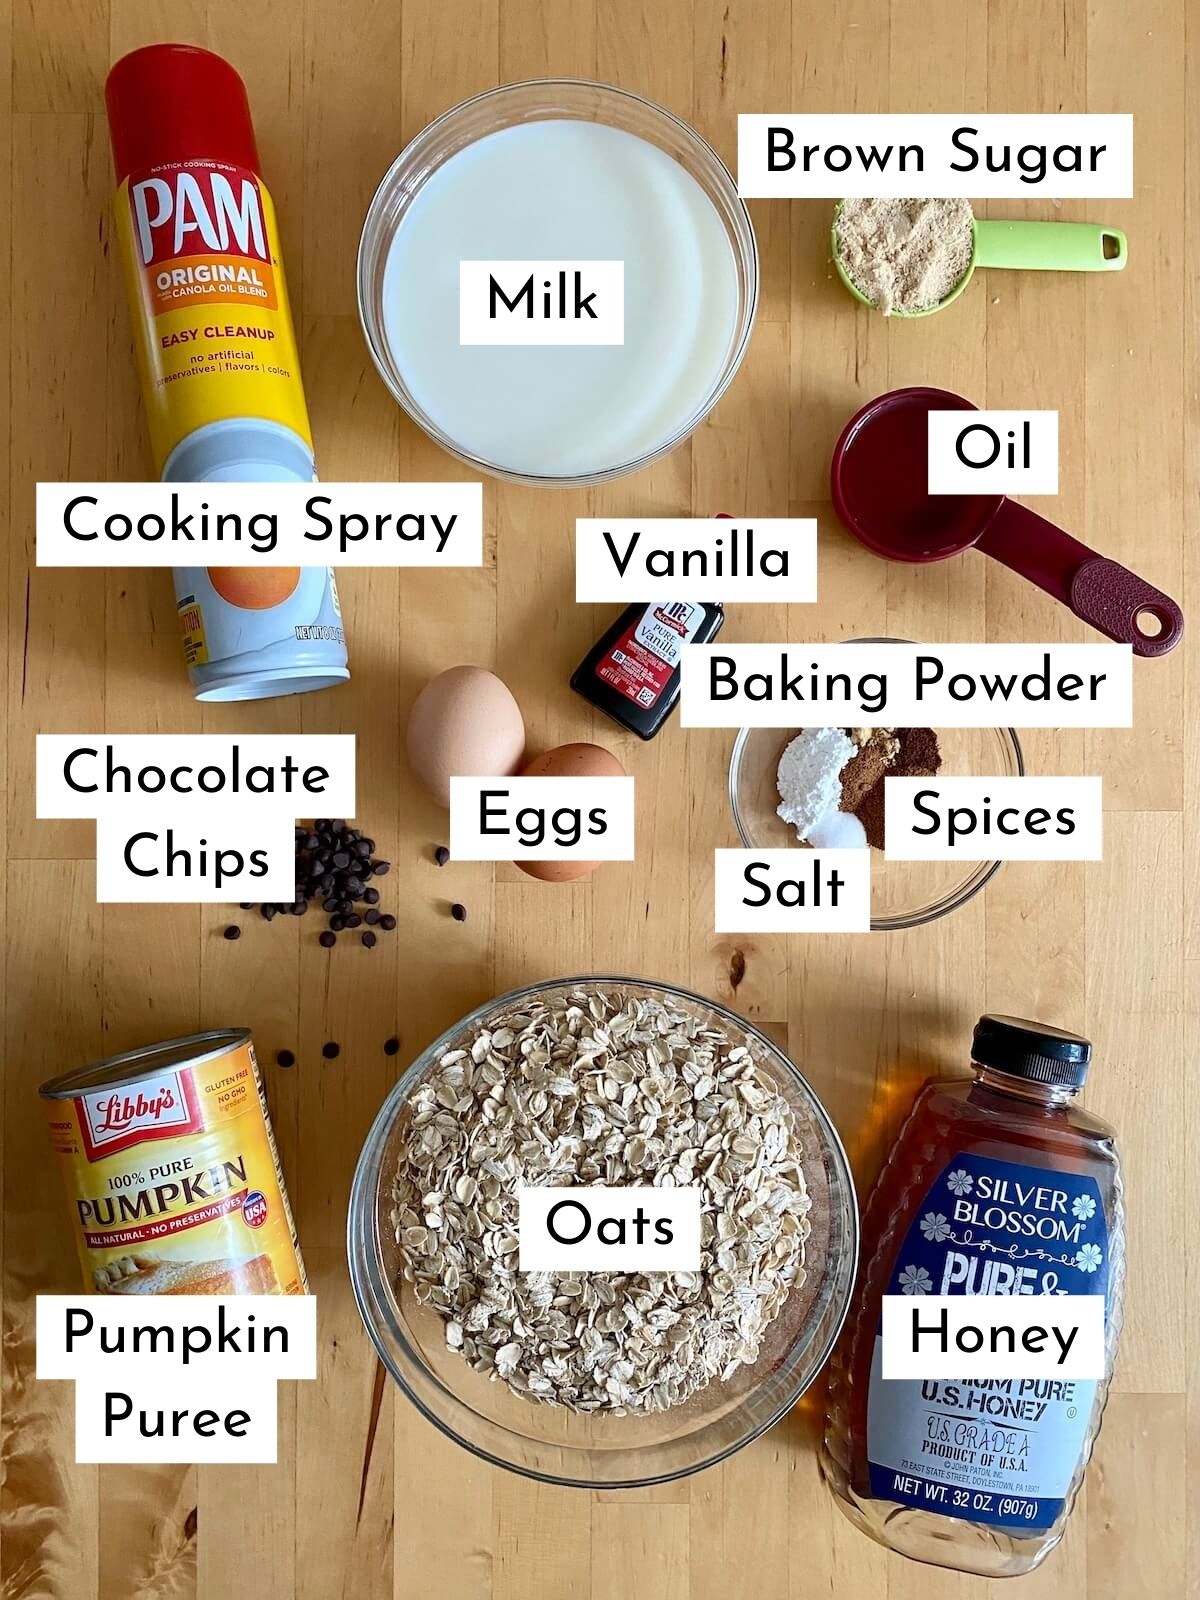 The ingredients to make pumpkin baked oats on a wooden countertop. There is text on top of each ingredient stating what it is. The ingredients include: cooking spray, milk, brown sugar, oil, vanilla, baking powder, salt, spices, eggs, chocolate chips, pumpkin puree, oats, honey.